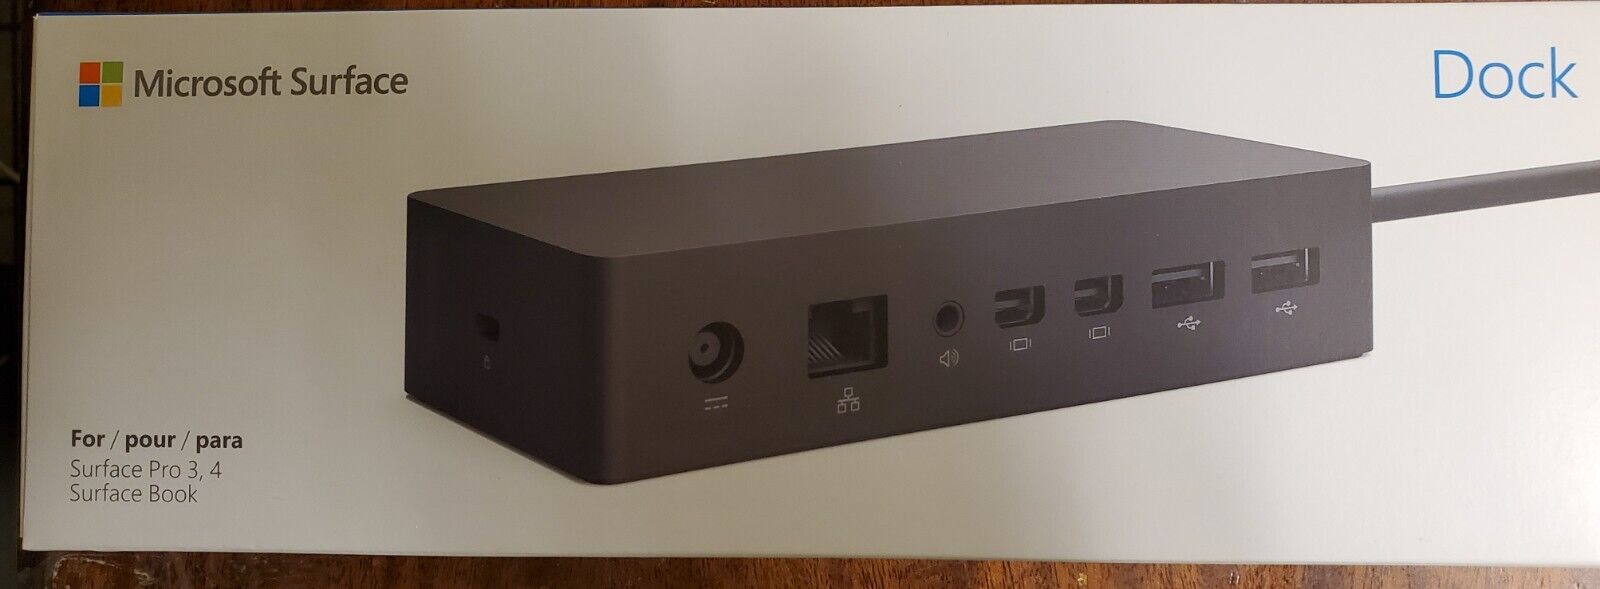 Microsoft Surface Dock factory sealed